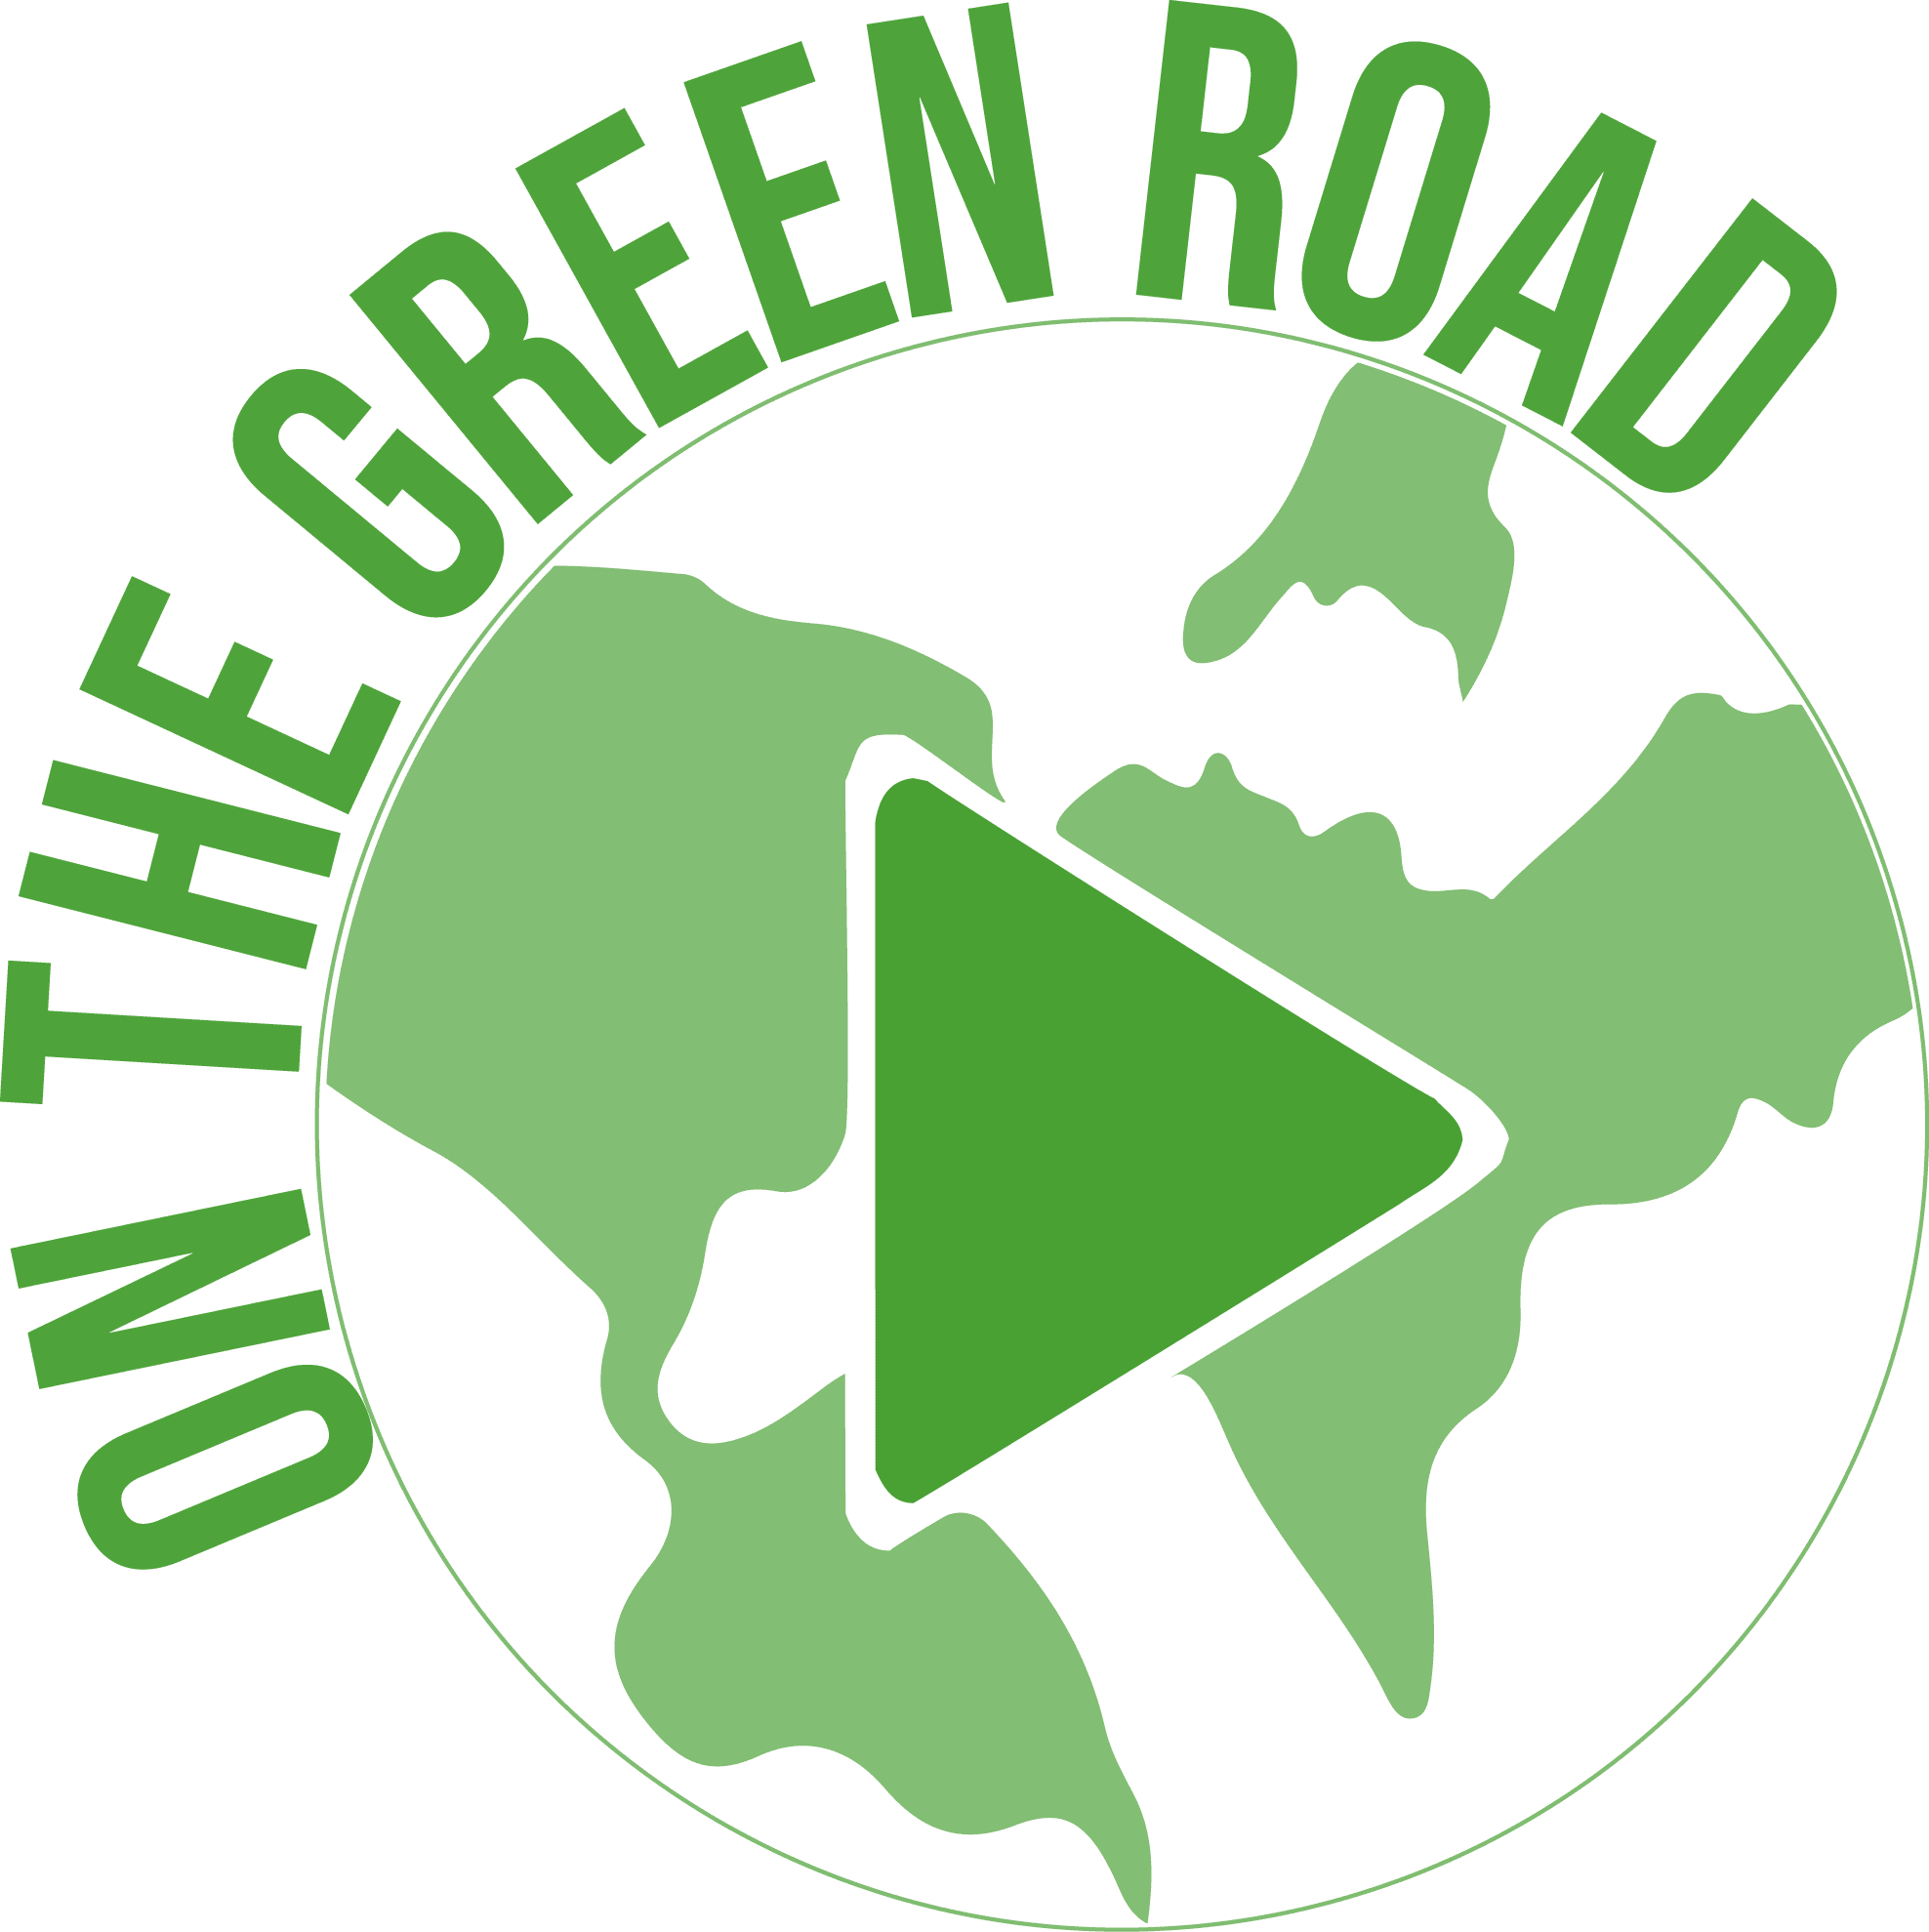 Logo - On The Green Road